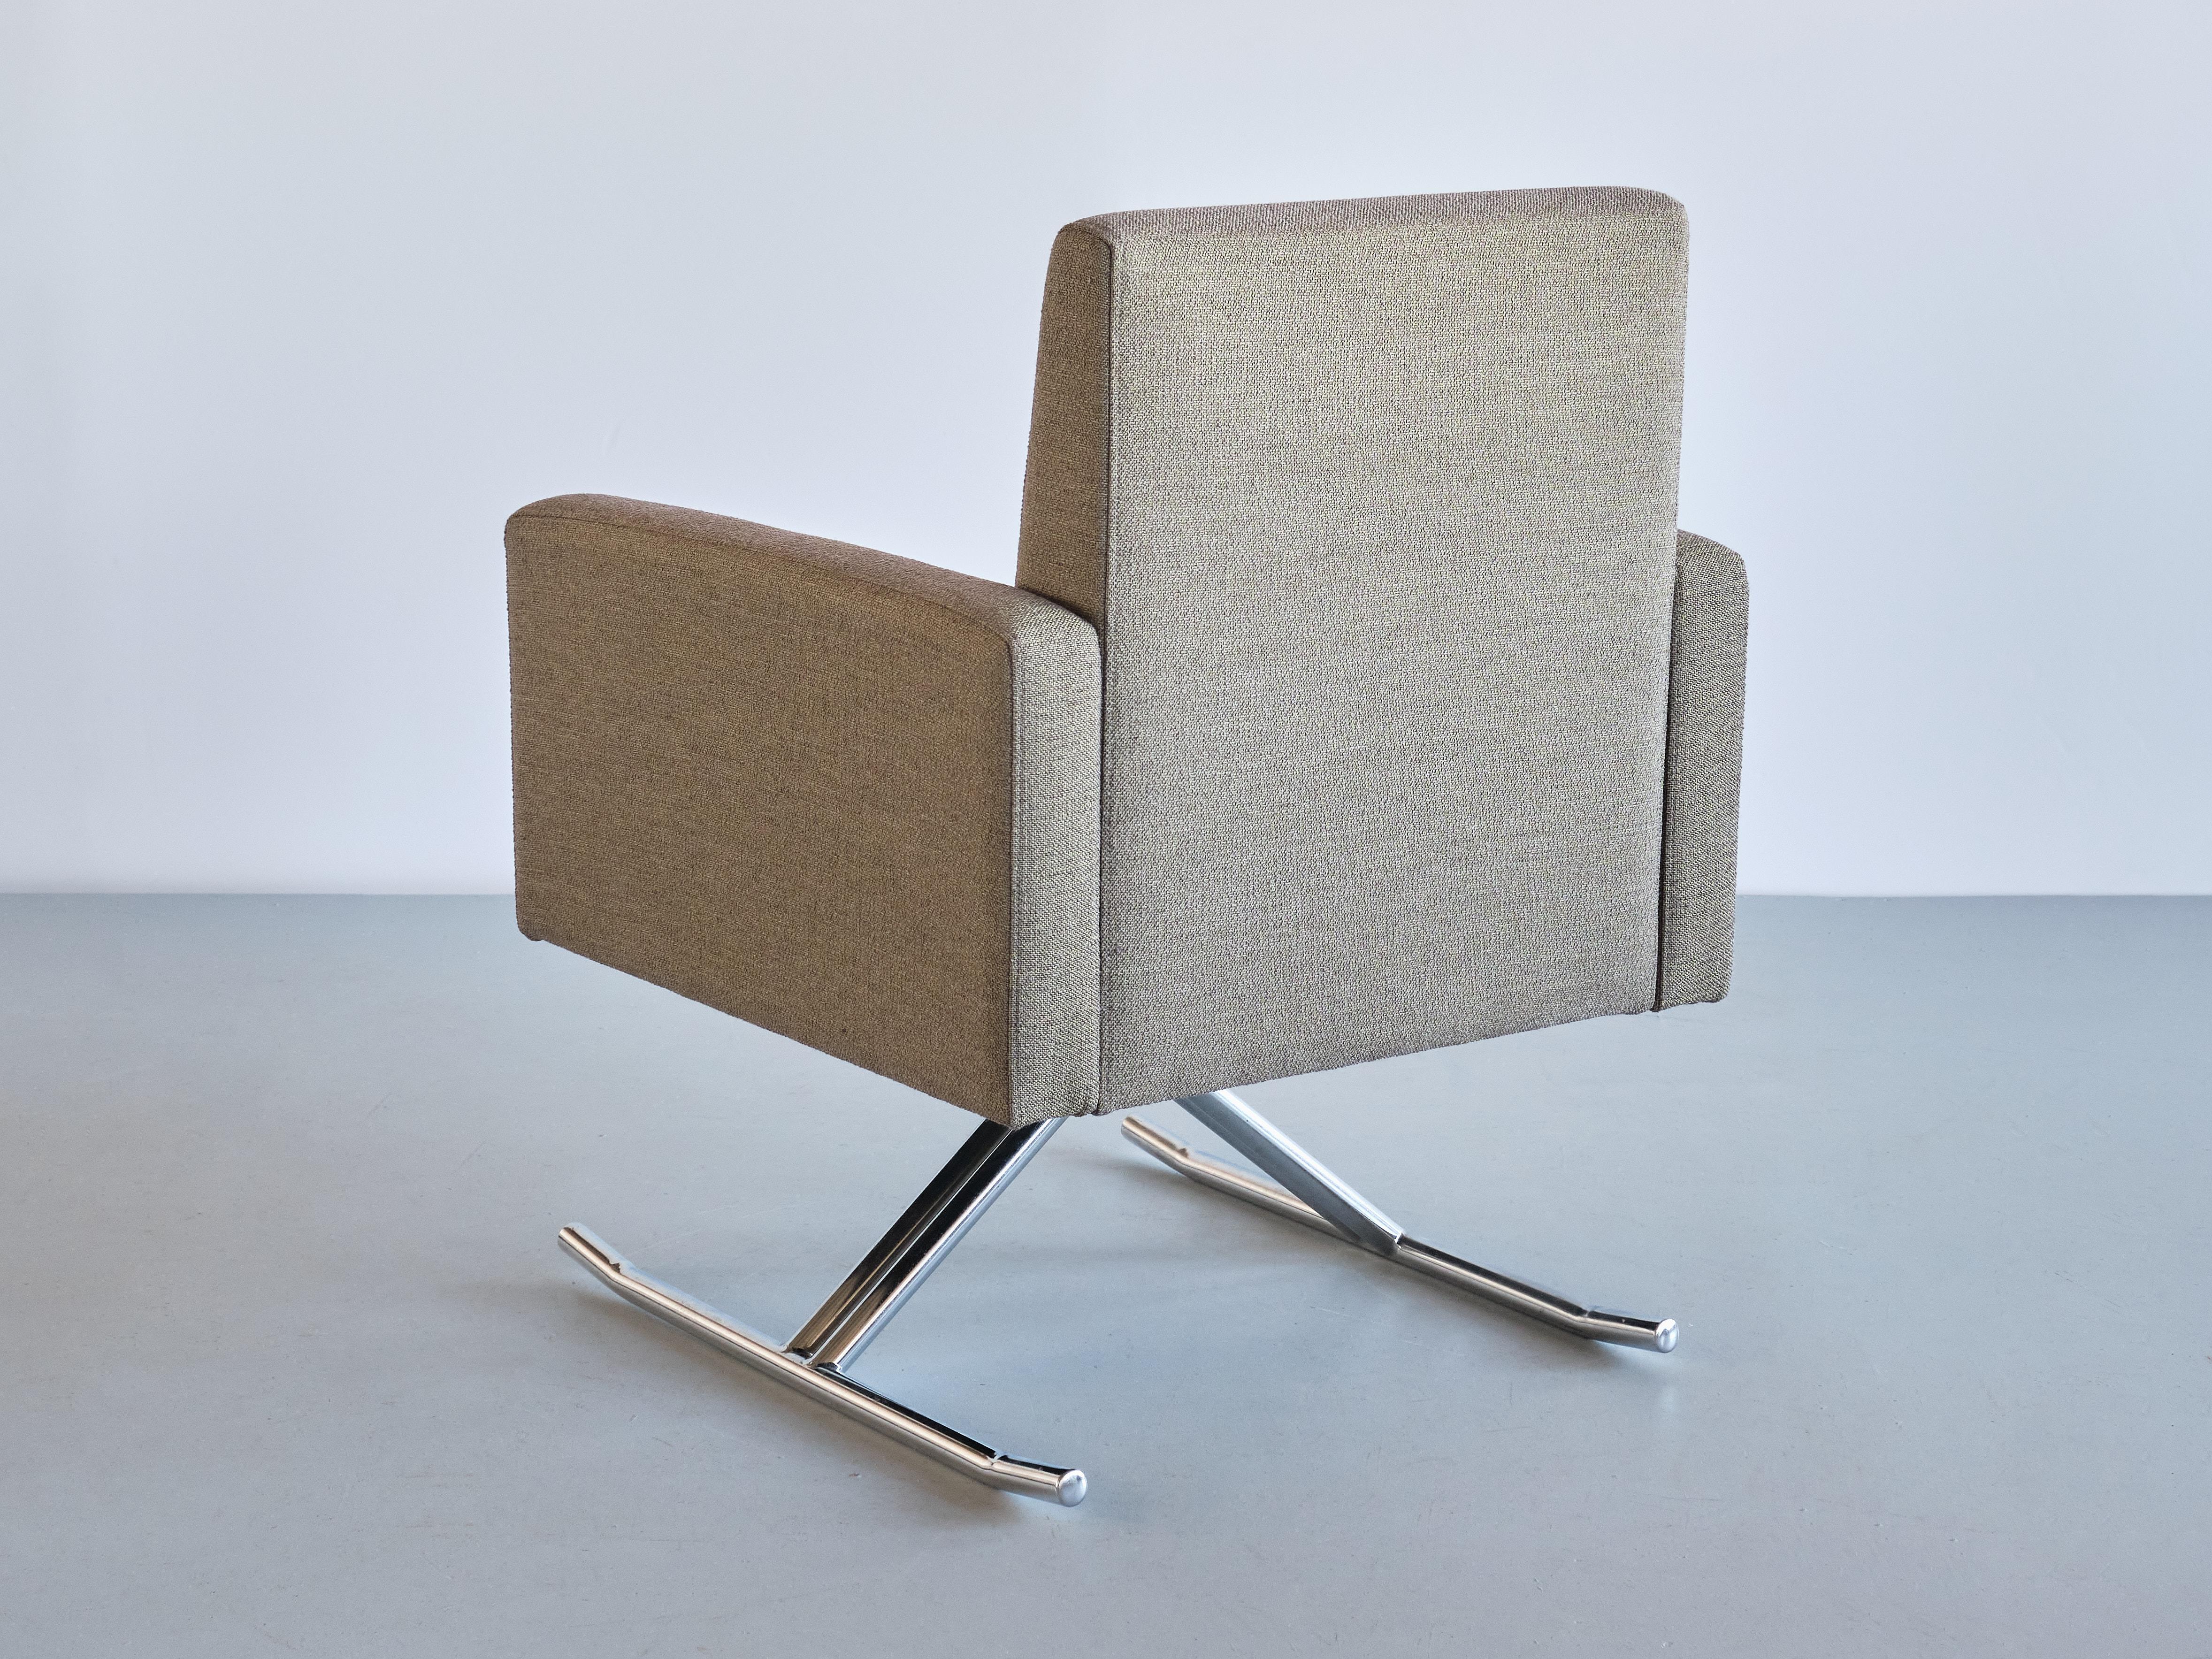 Rare Pair of Joseph-André Motte 'Luge' Armchairs, Edition MPS, France, 1967 For Sale 5